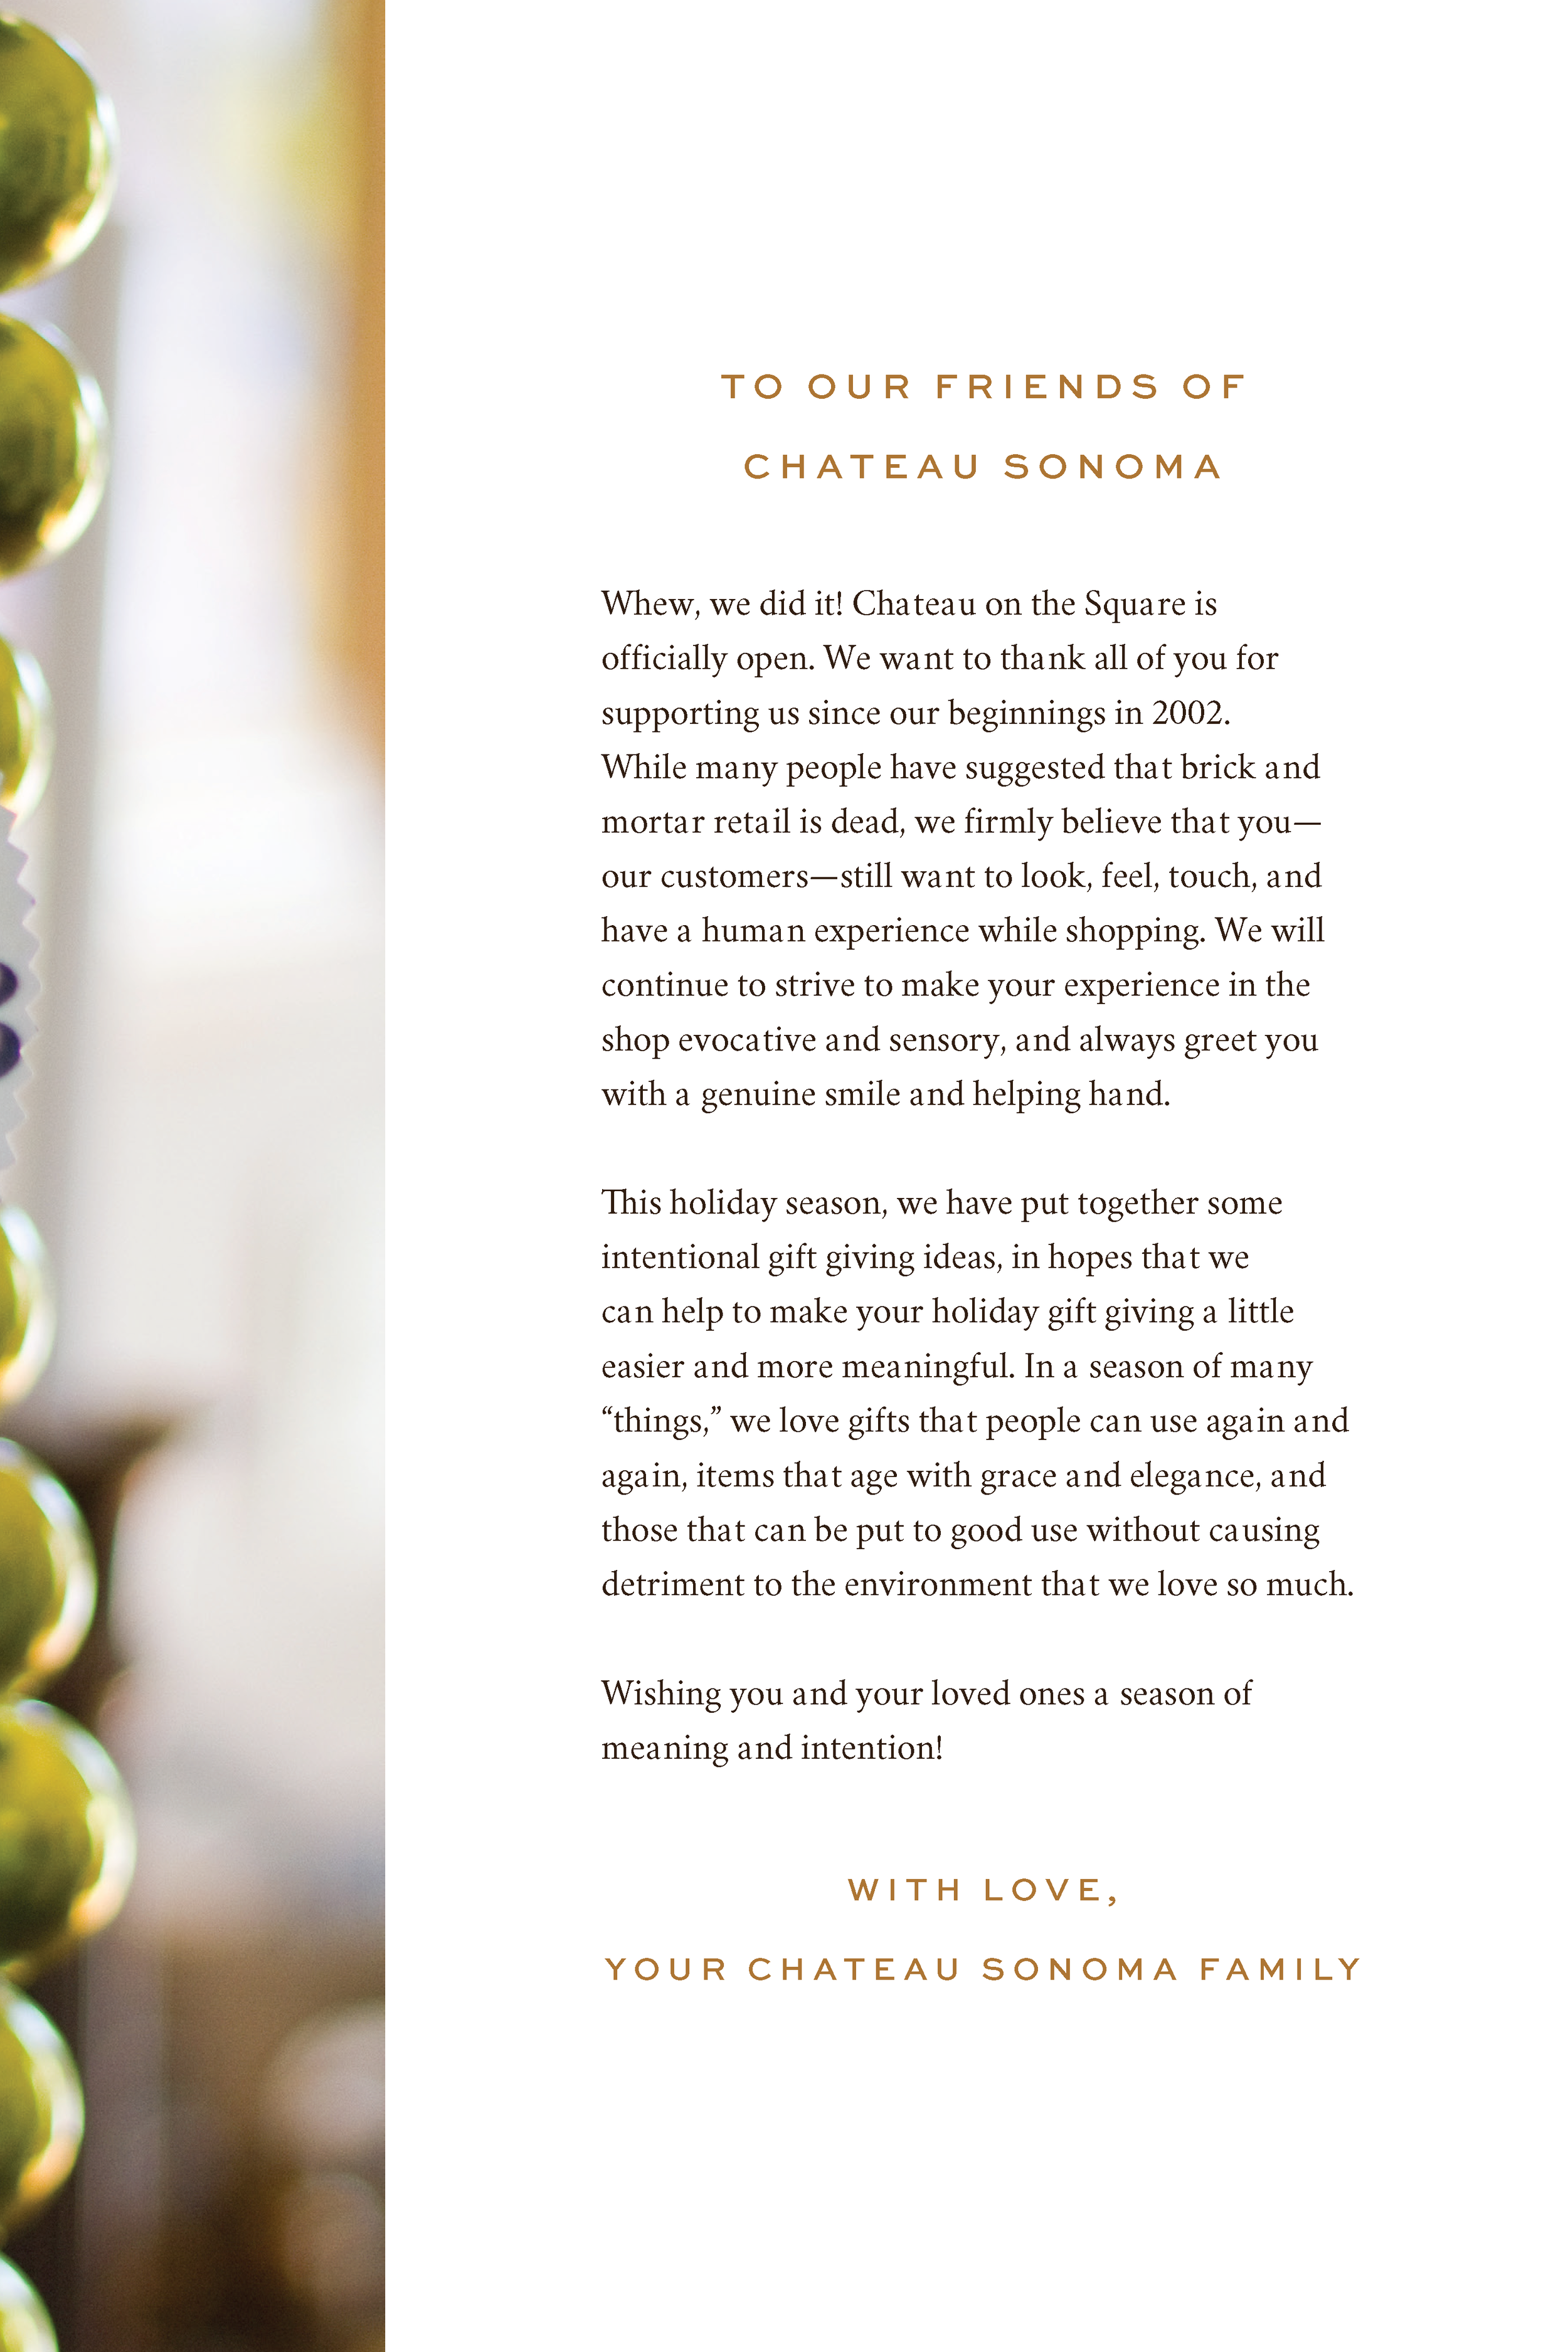 ChateauSonoma_HolidayLookbook_19_pages (1)_Page_05.png